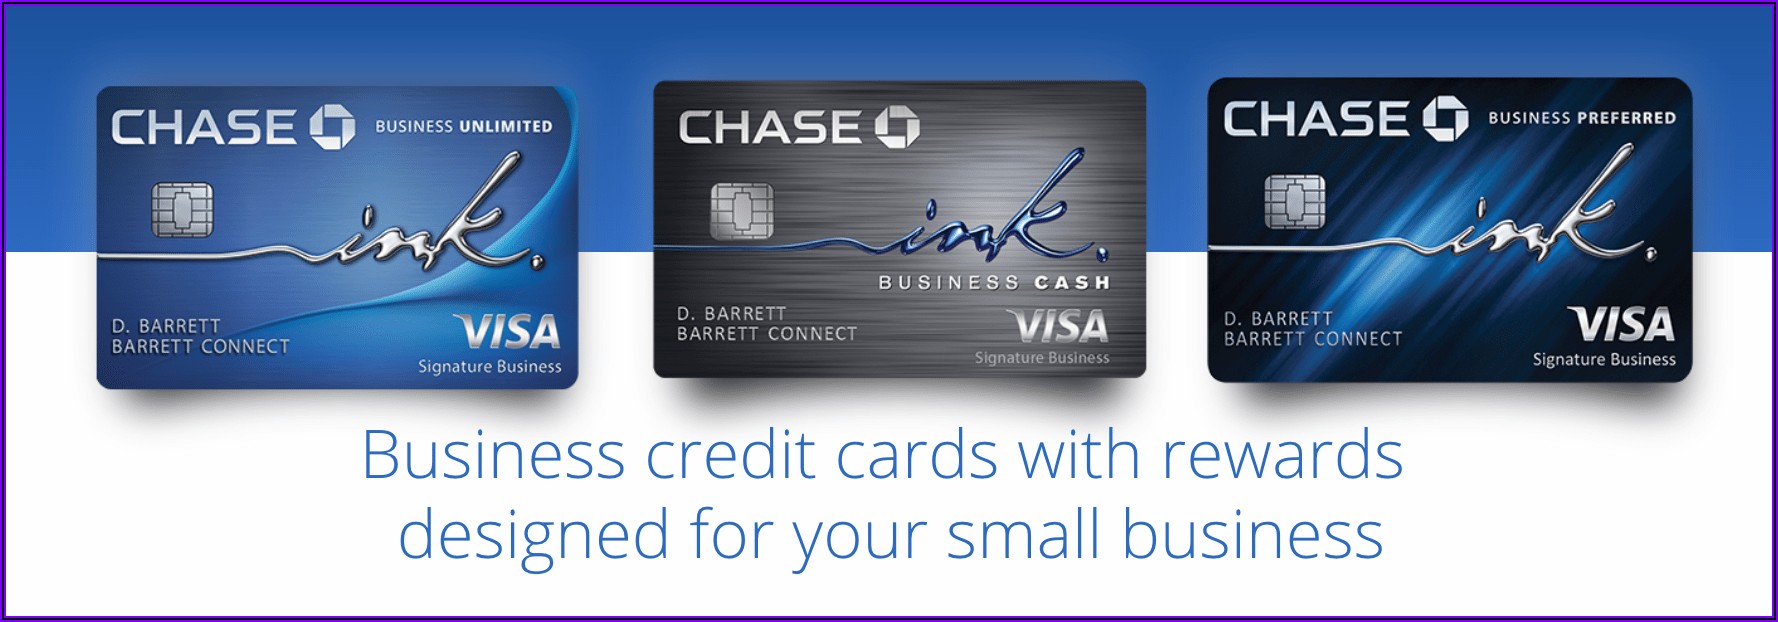 Chase Ink Business Card Promotion